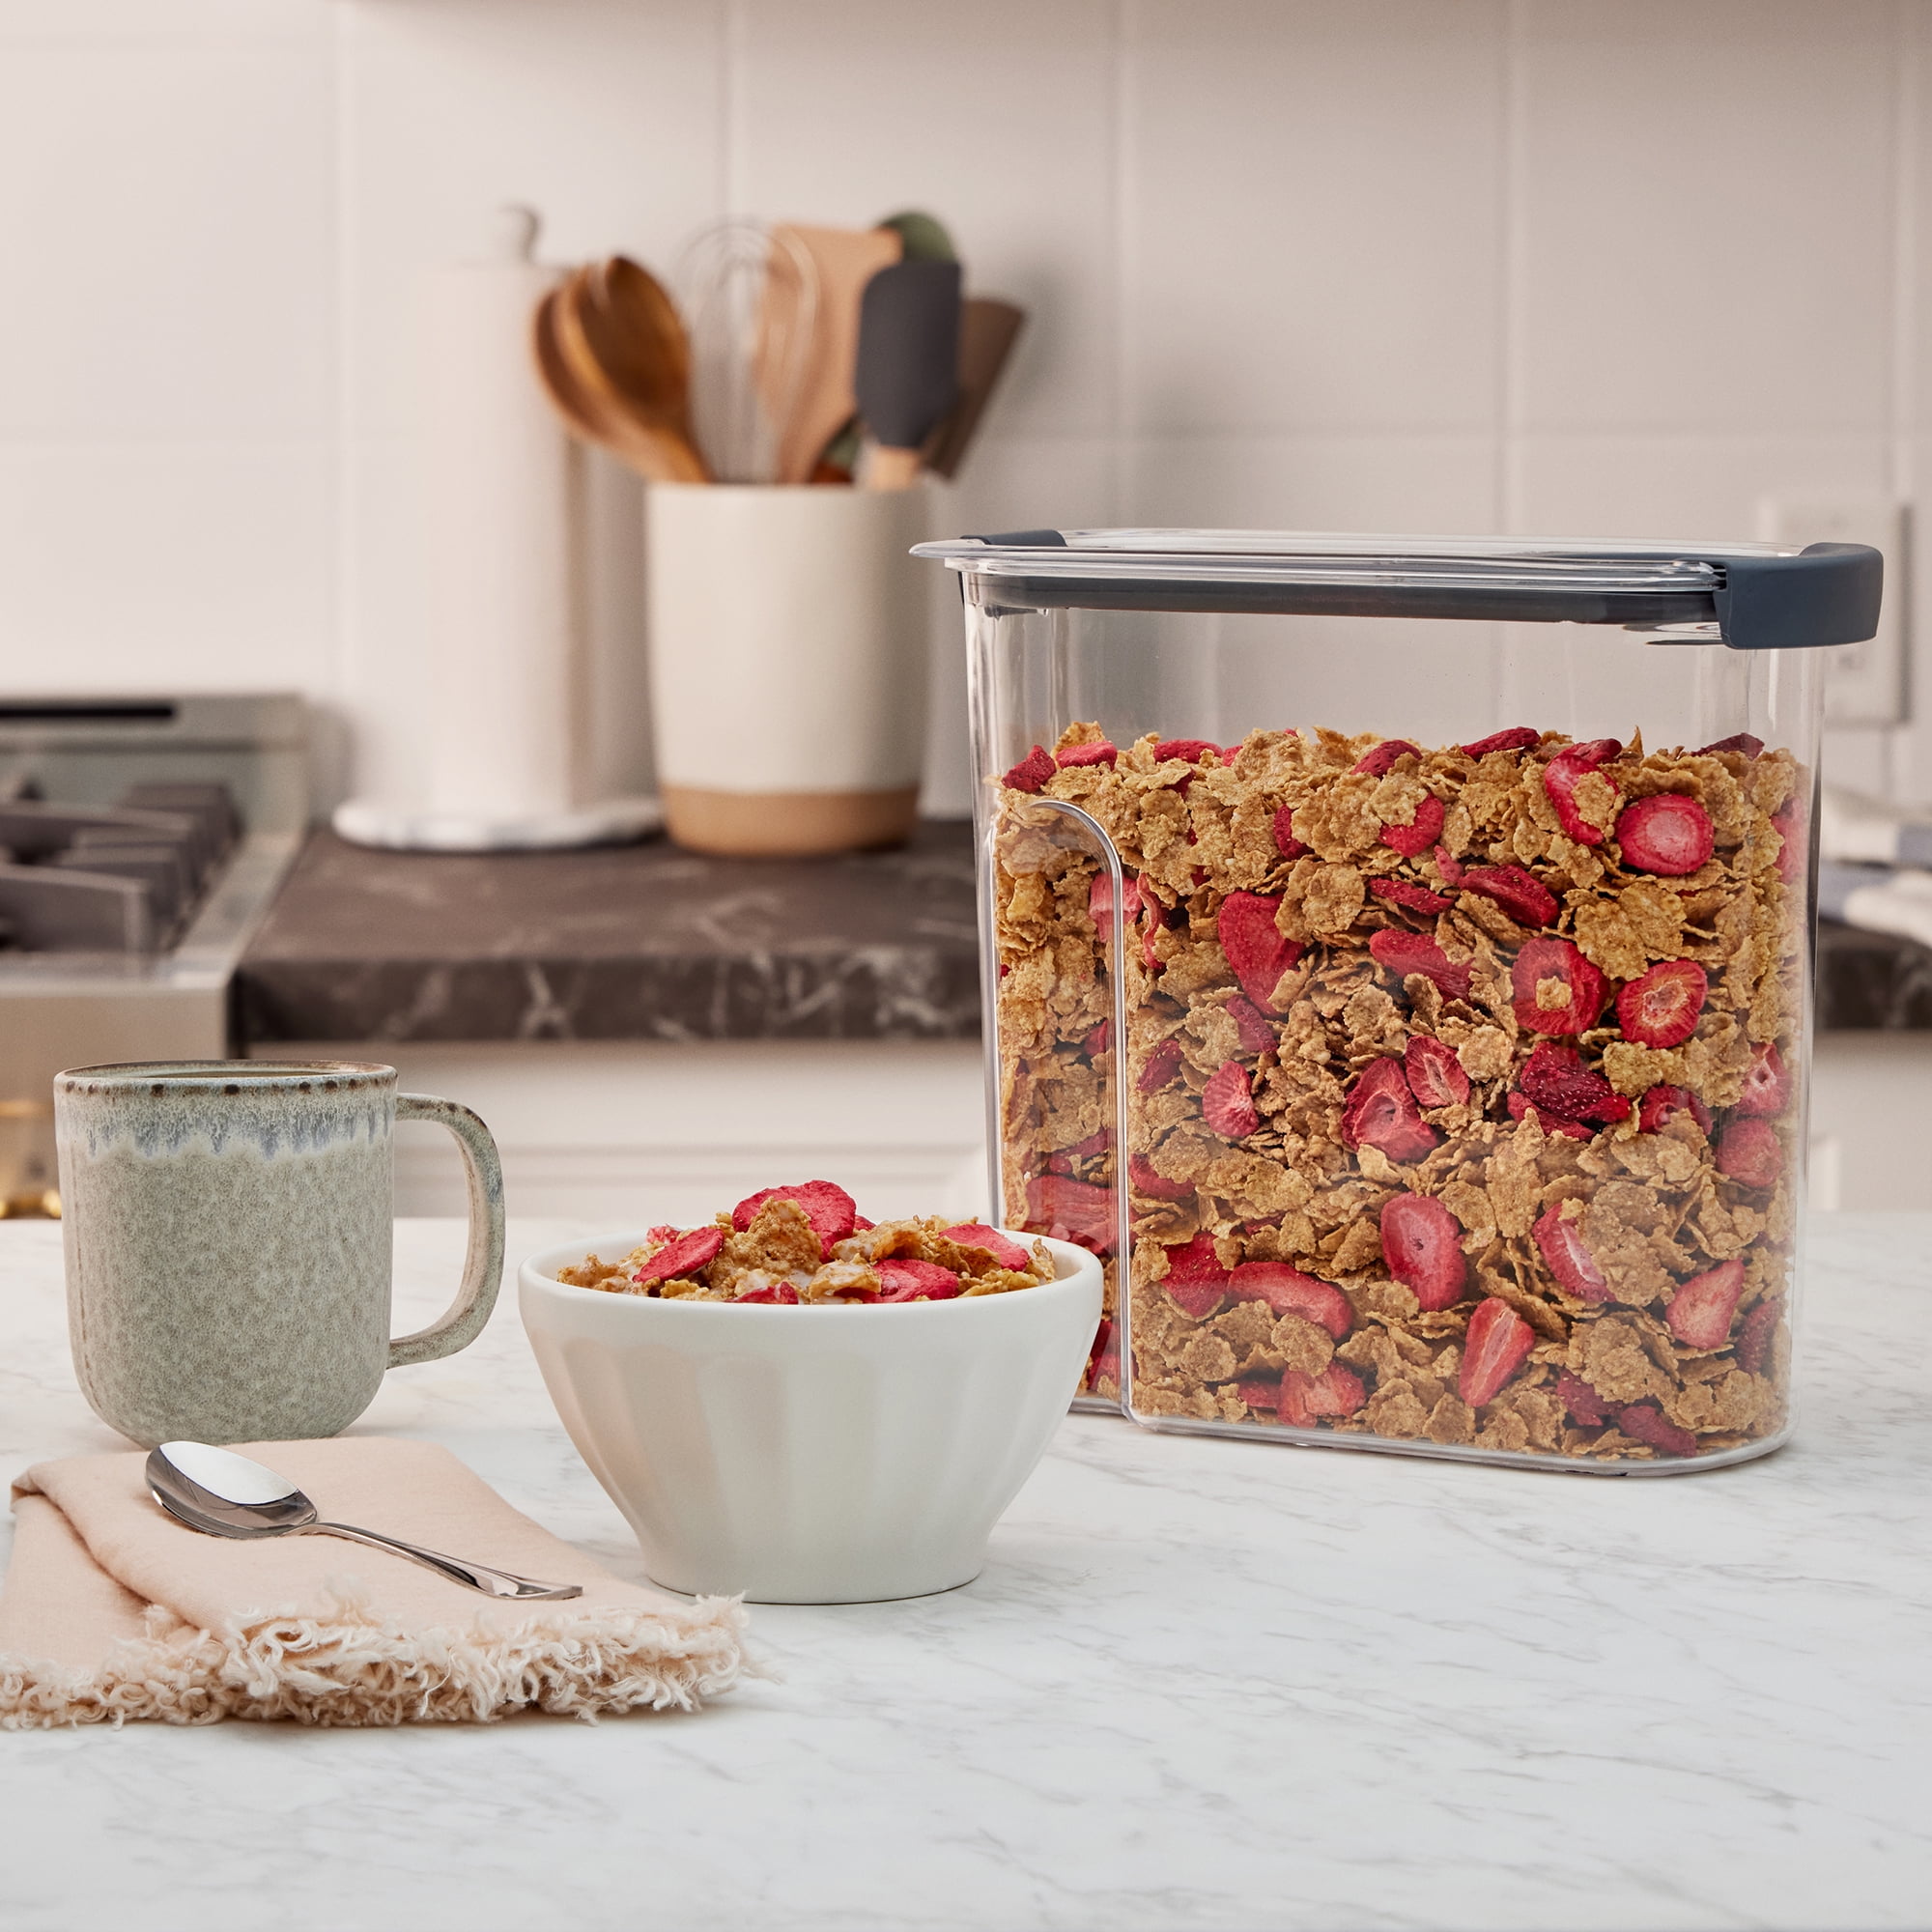 Rubbermaid® Brilliance™ Cereal Keeper Container, 4.5 L - King Soopers